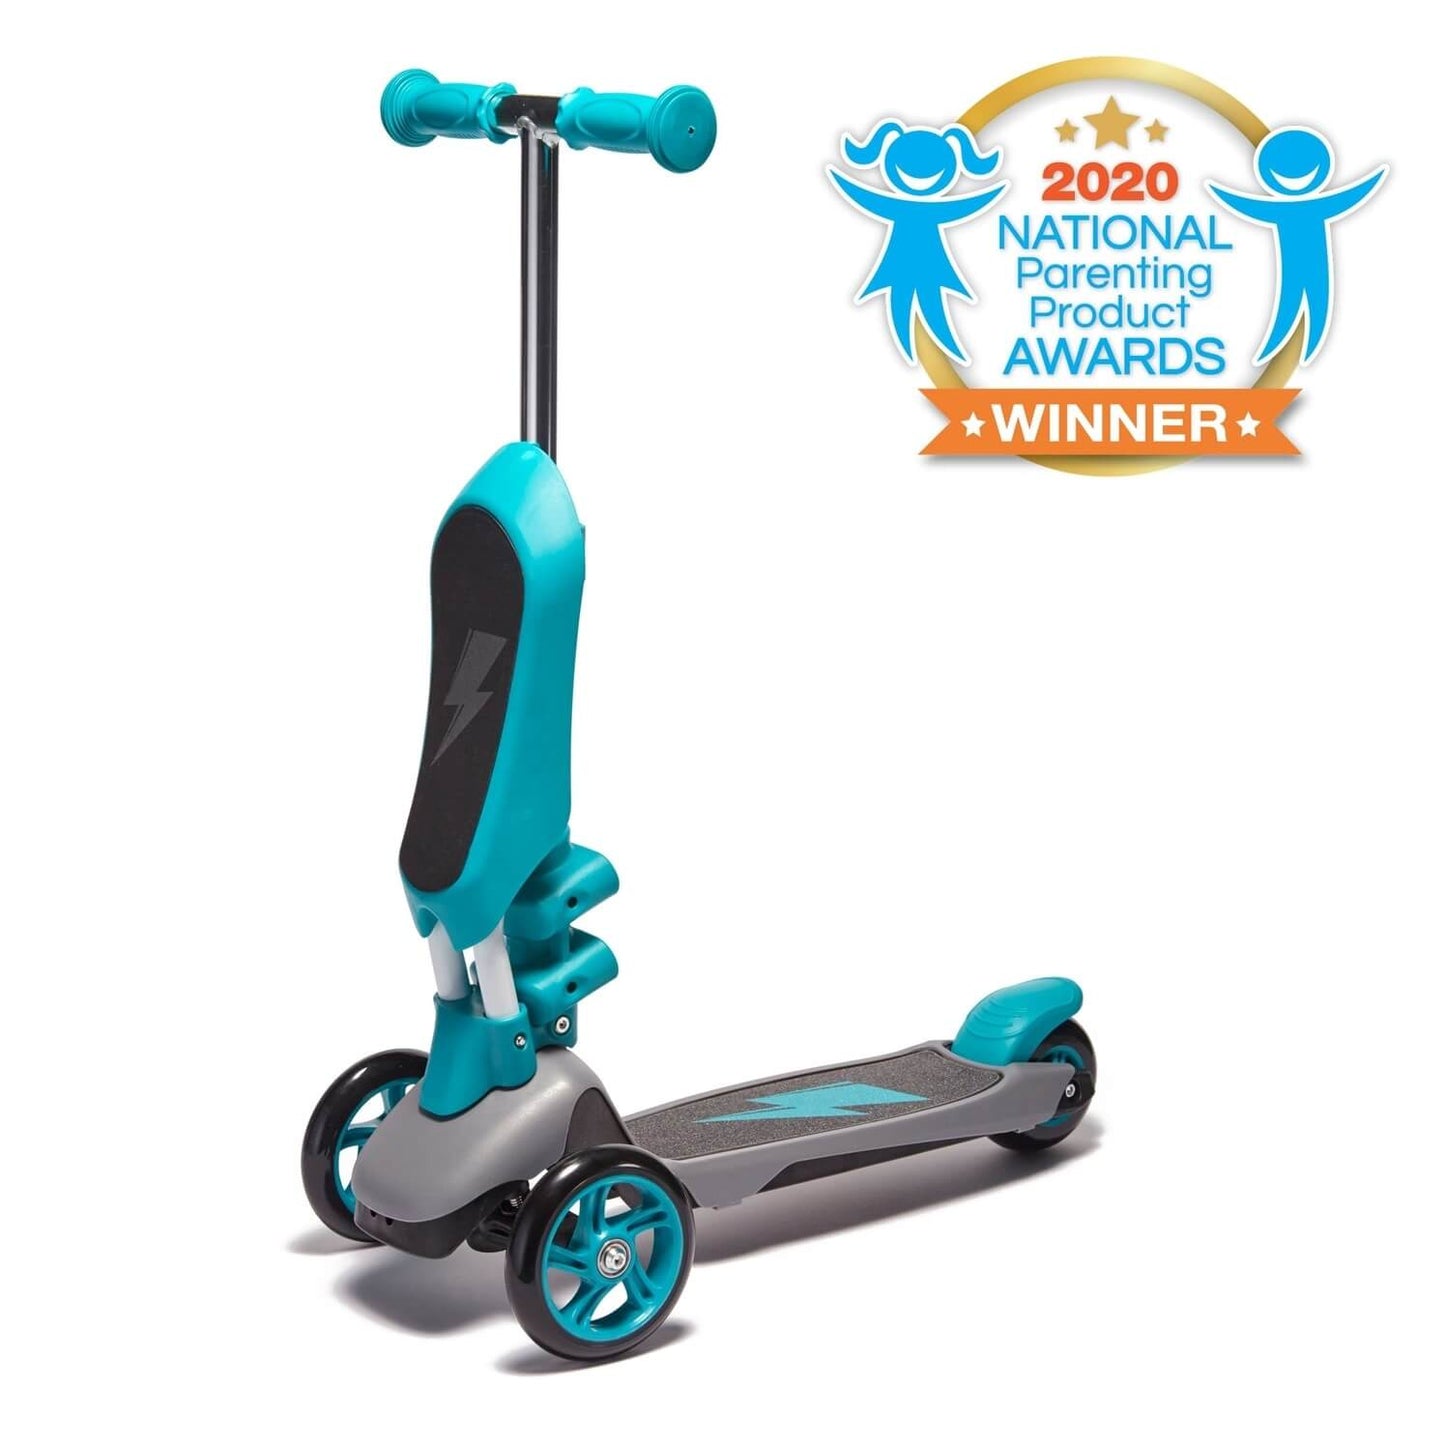 Award winning Svolta Ace 2-in-1 toddler and little kids scooter ride on in Teal Grey Gray, Sit and Stand, convertible